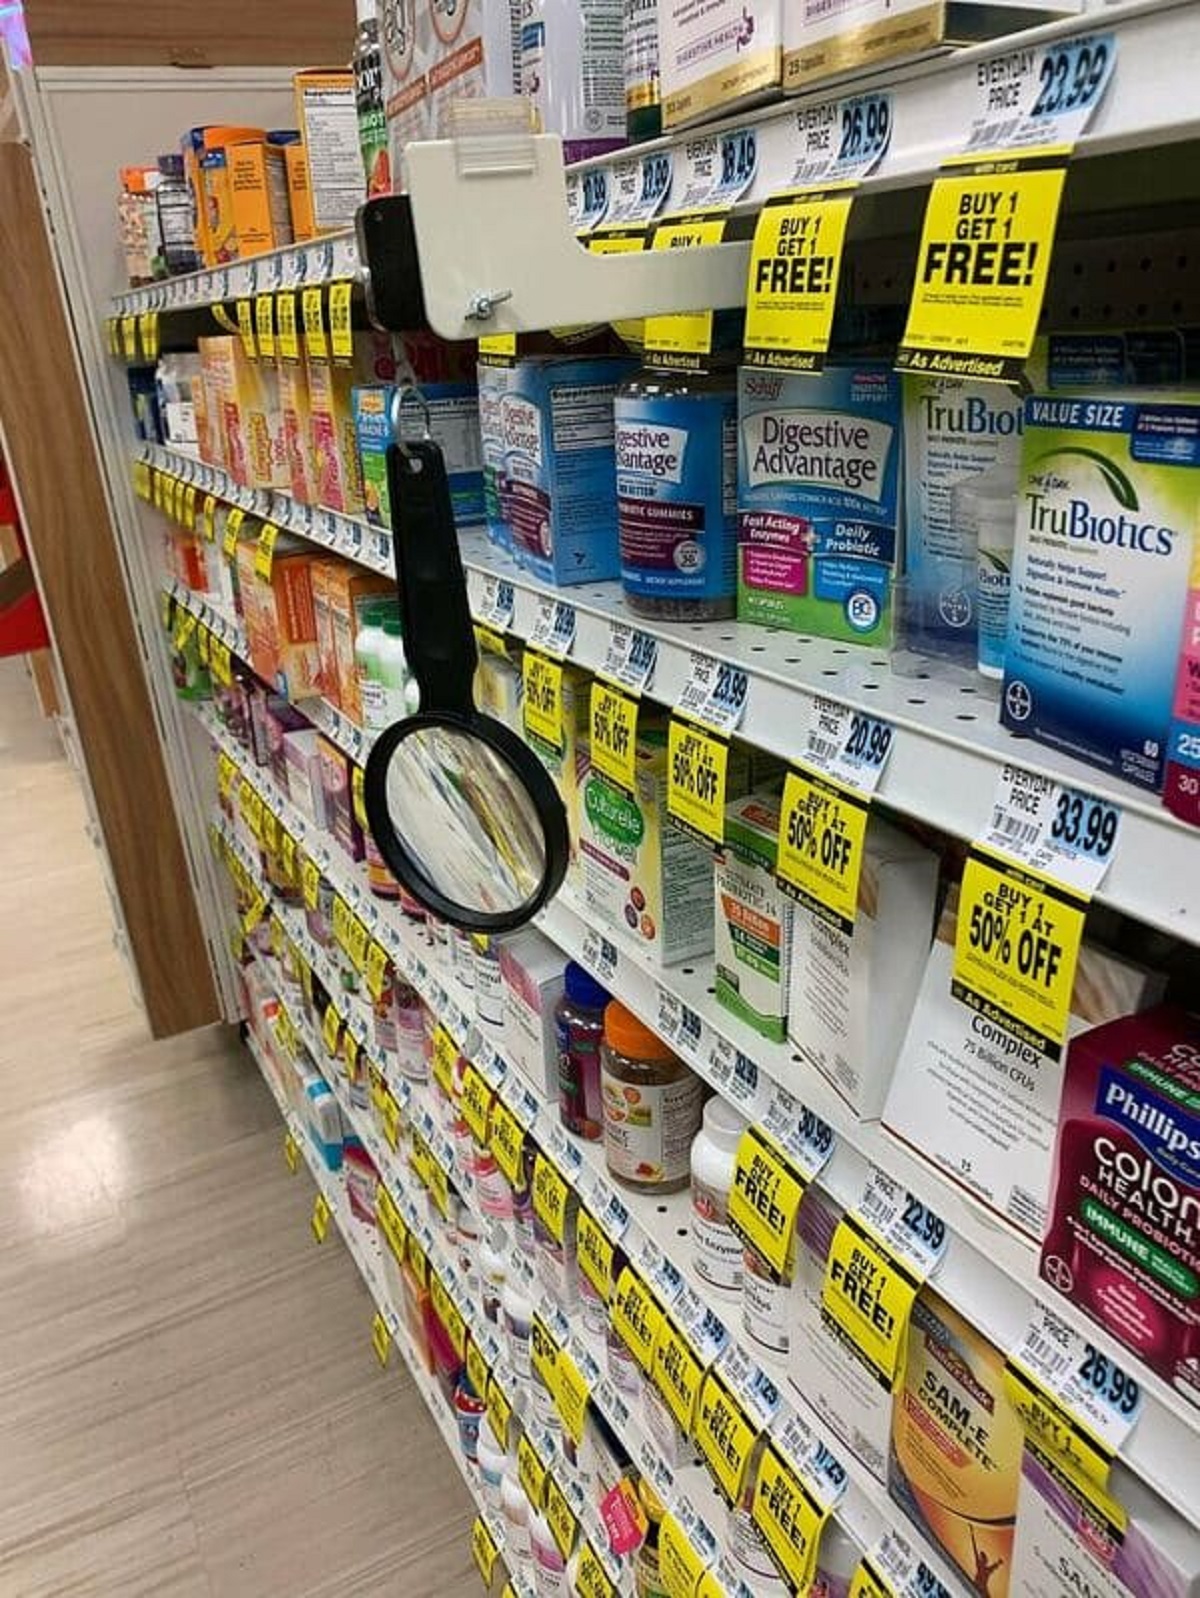 “This Rite-Aid Has A Magnifier So You Can Read The Labels On The Medicine”